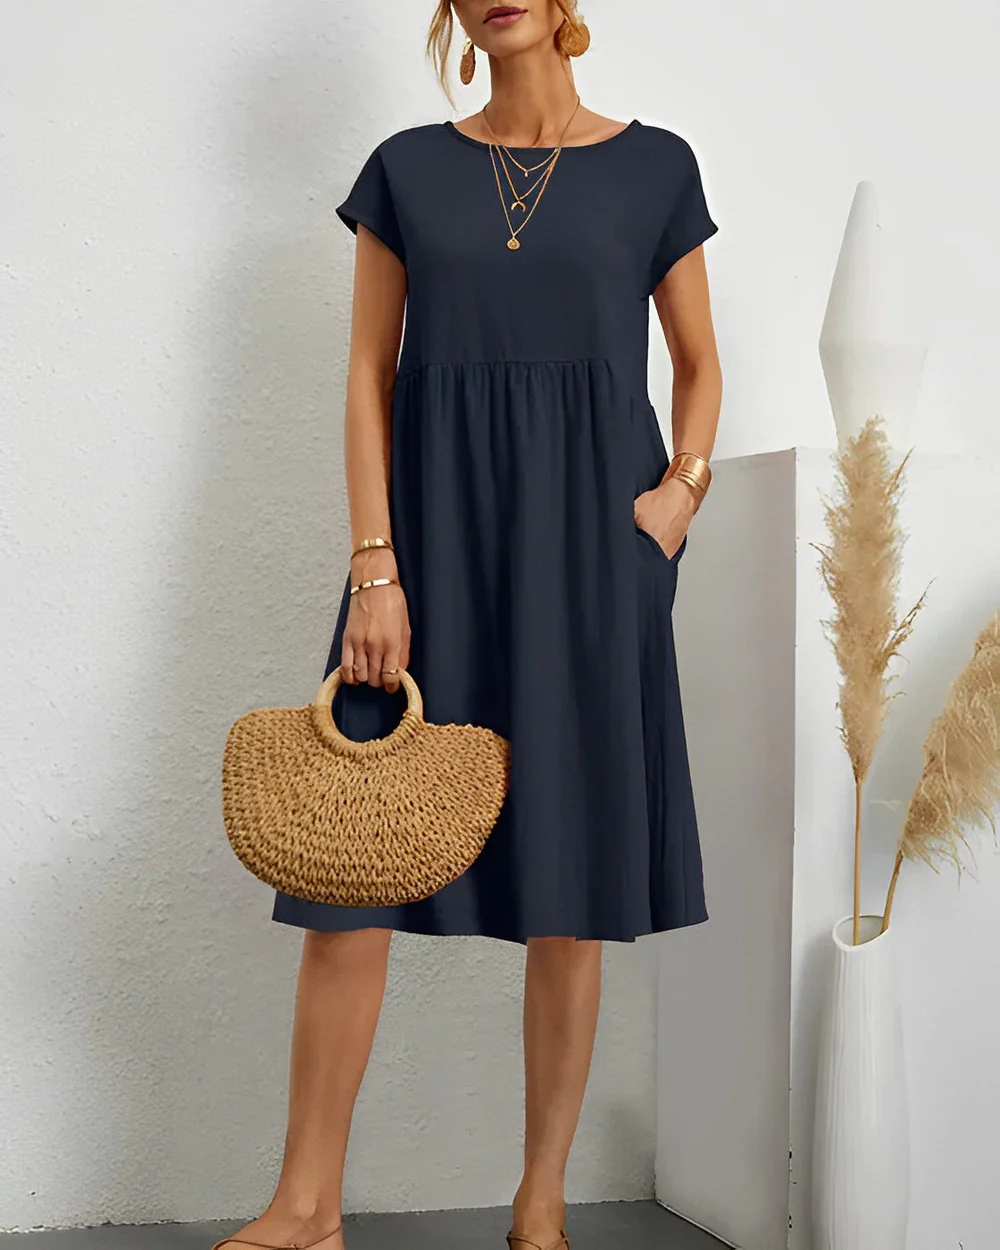 Naturalee® - The Perfect Summer Dress